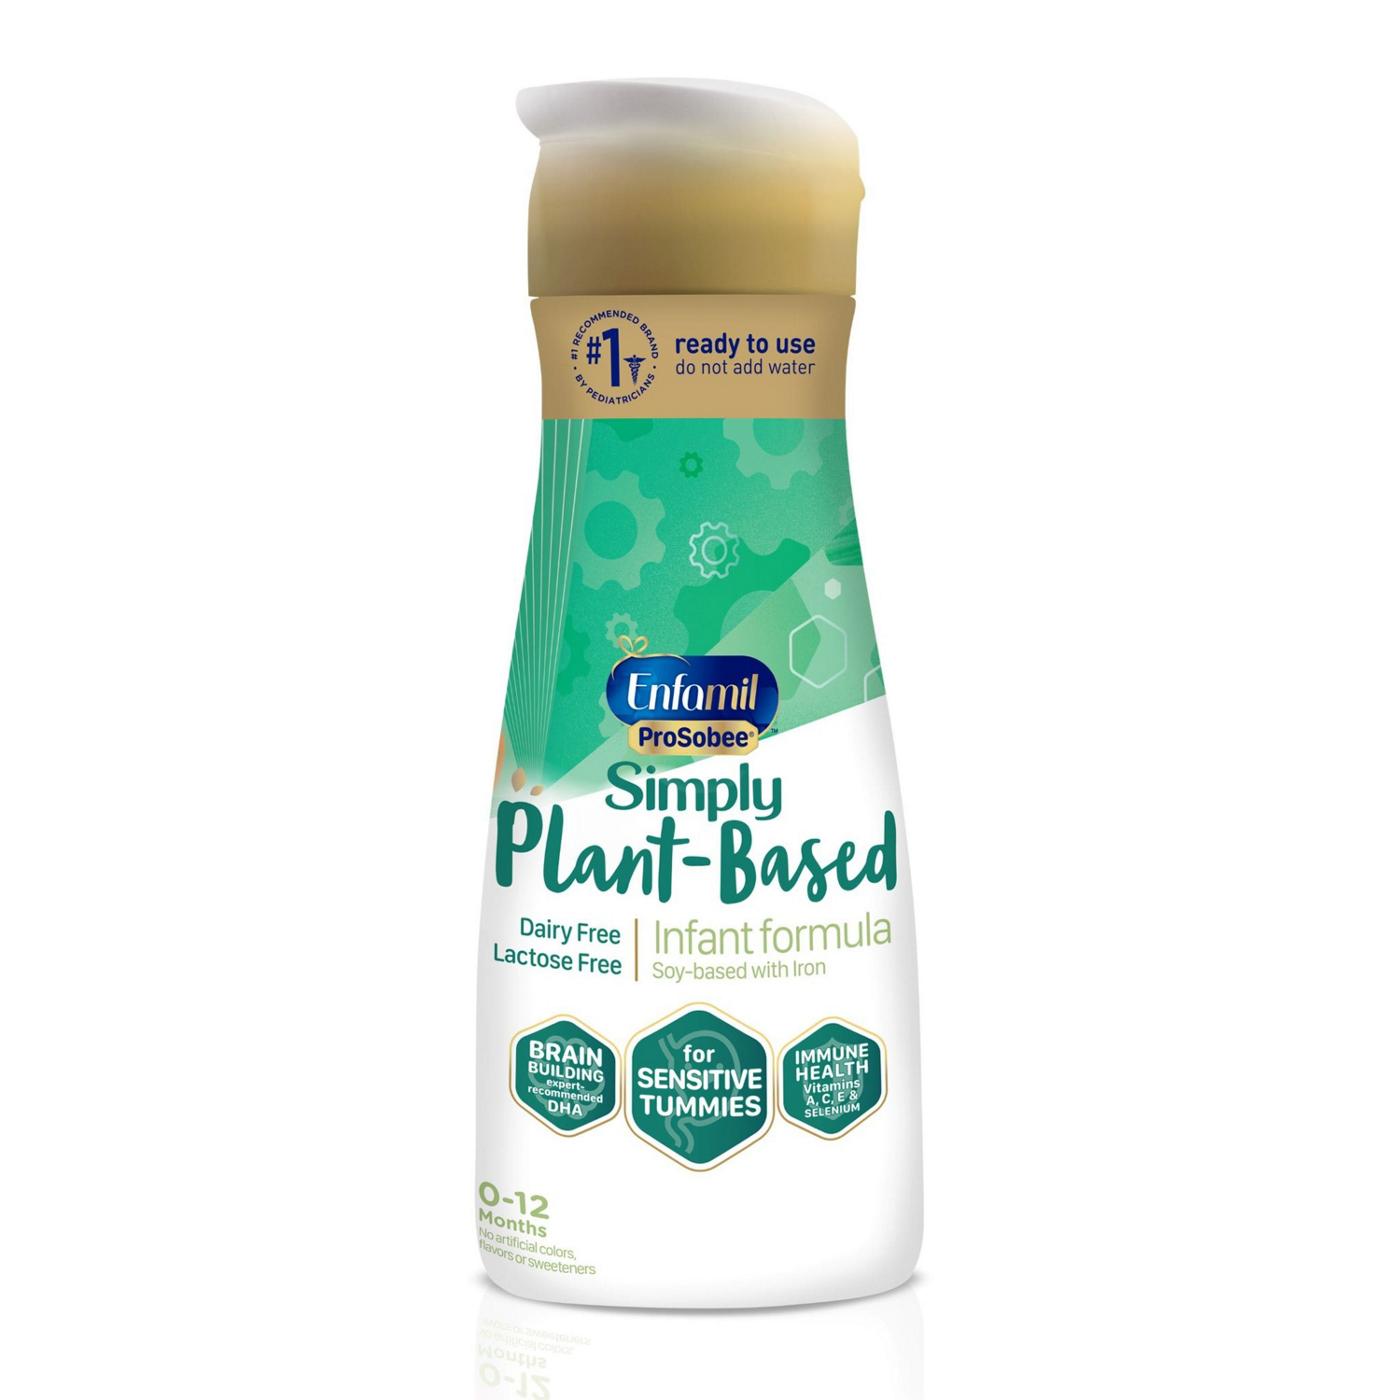 Enfamil ProSobee Simply Plant-Based Ready-to-Feed Infant Formula; image 1 of 7